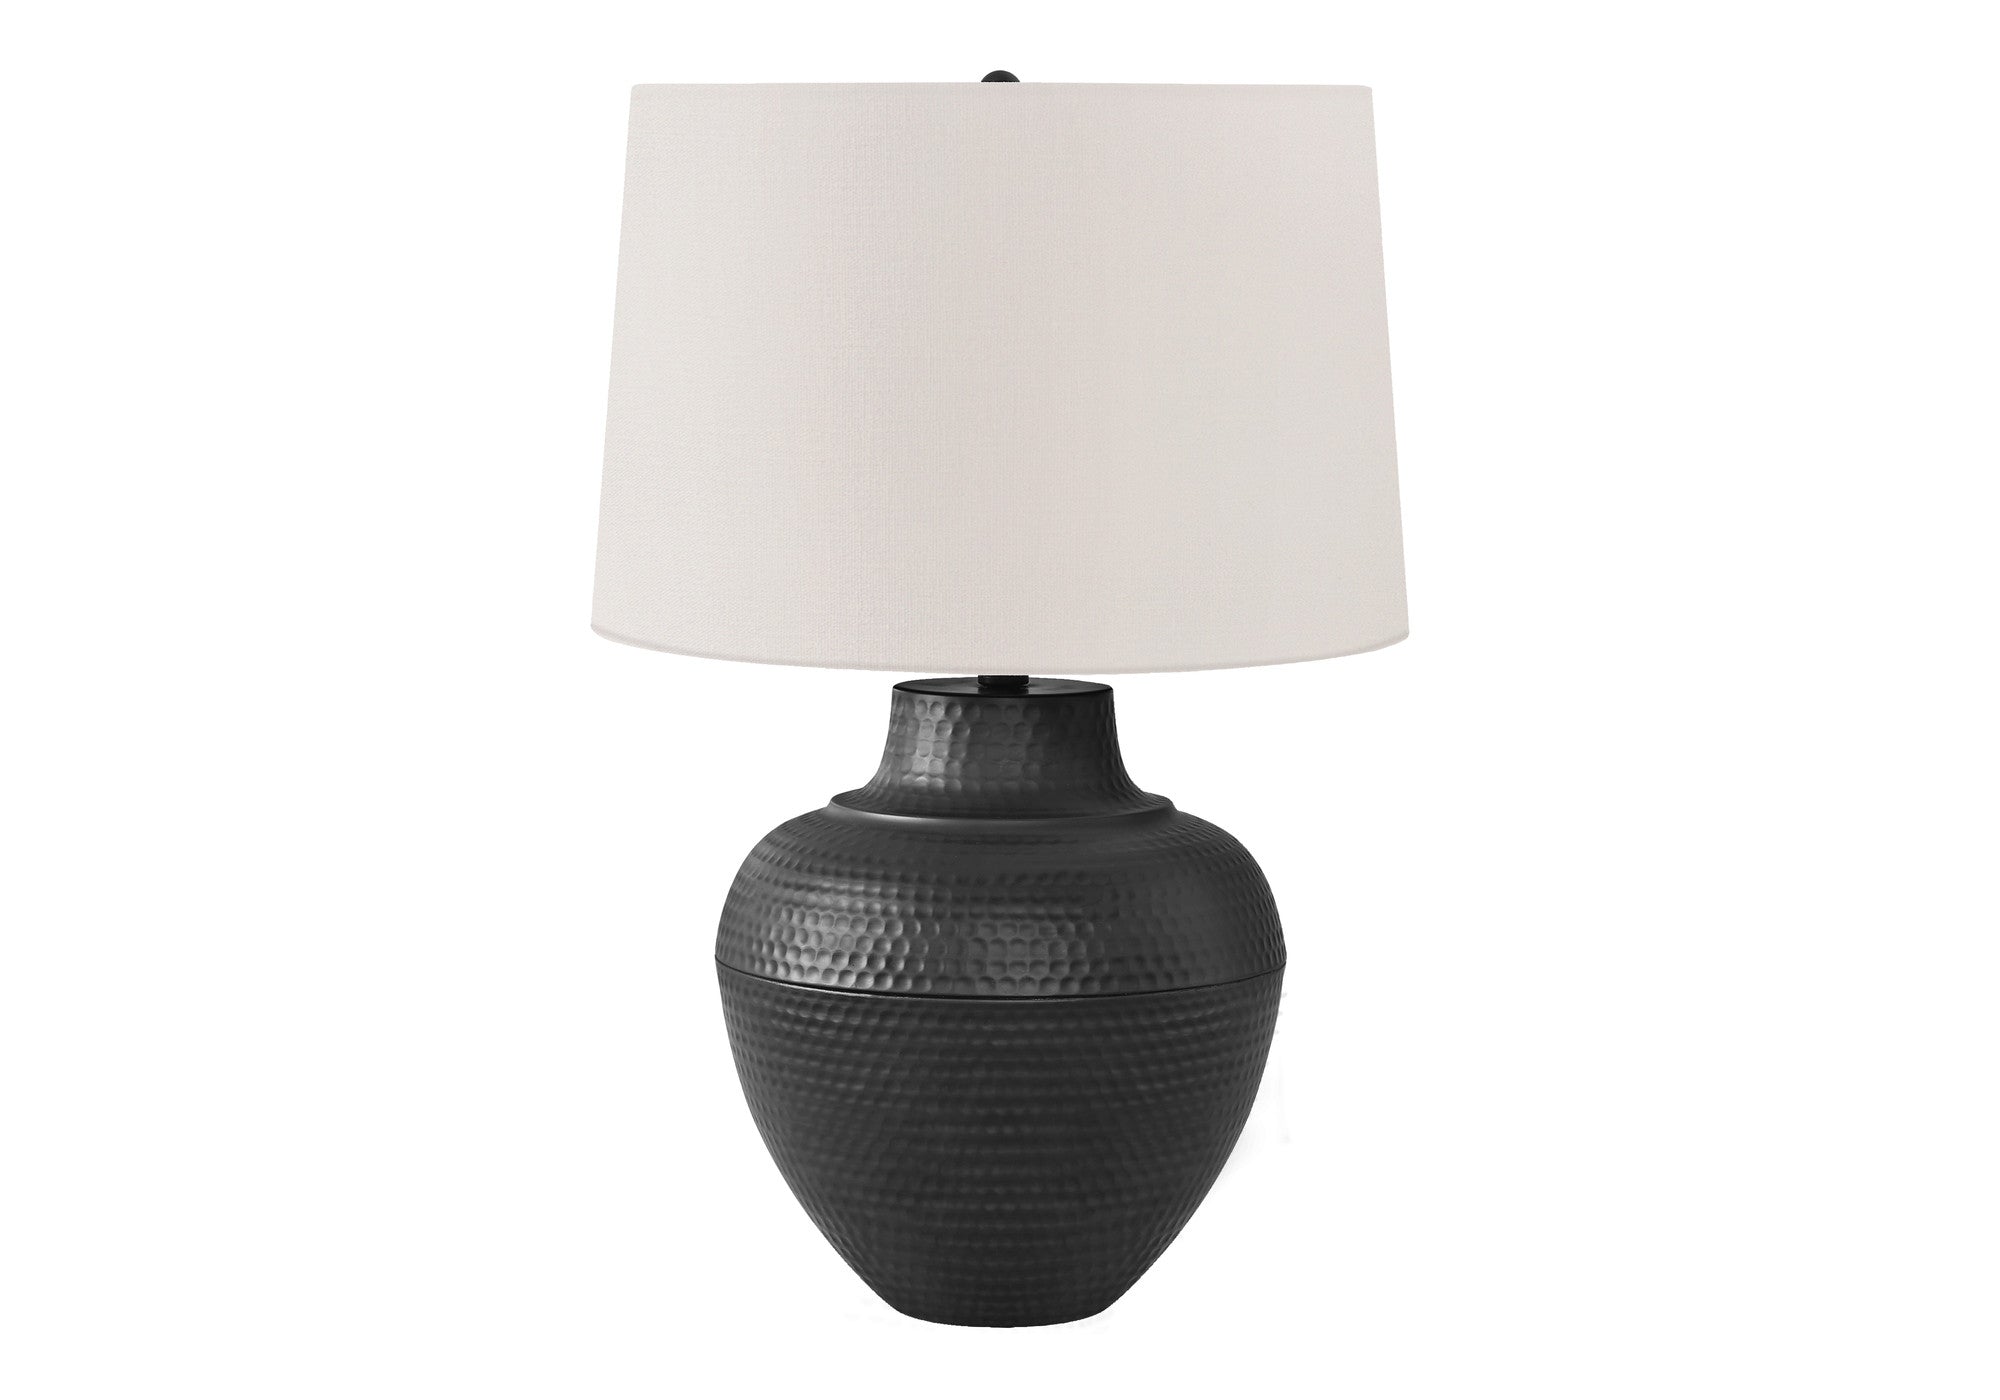 26" Black Metal Urn Table Lamp With Cream Empire Shade